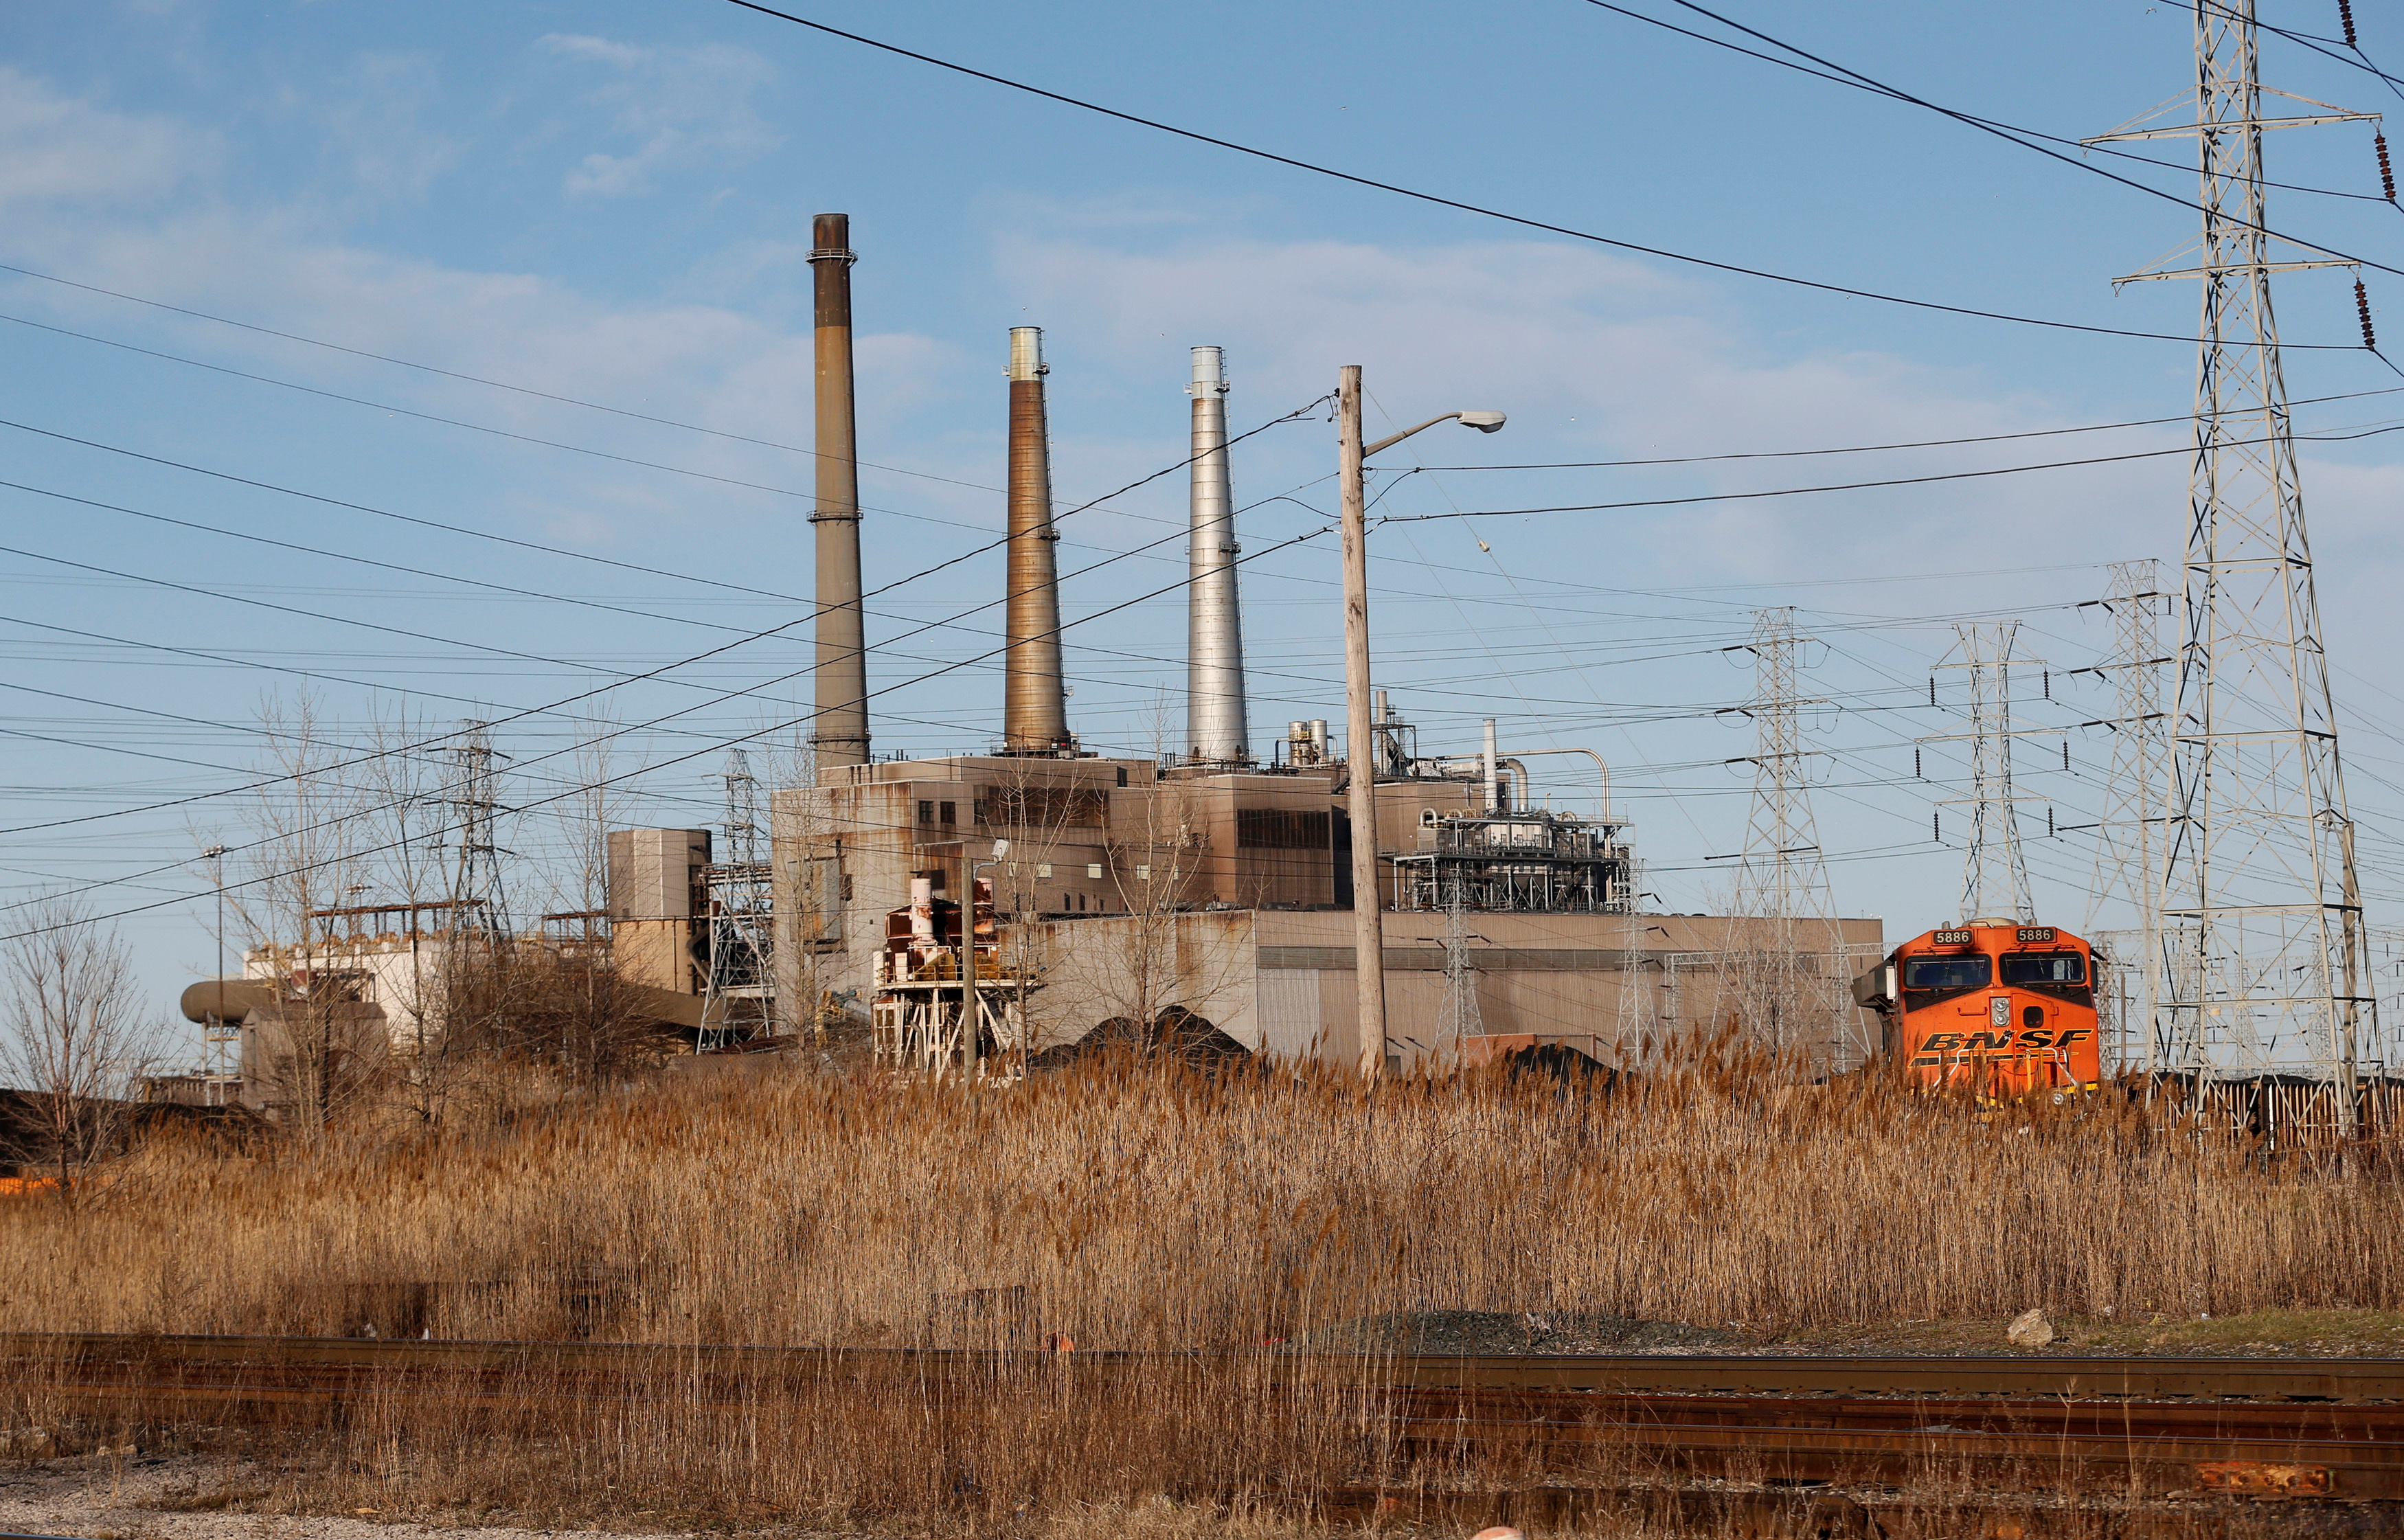 The River Rouge Power Plant, a coal-fired electricity plant operated by DTE Energy